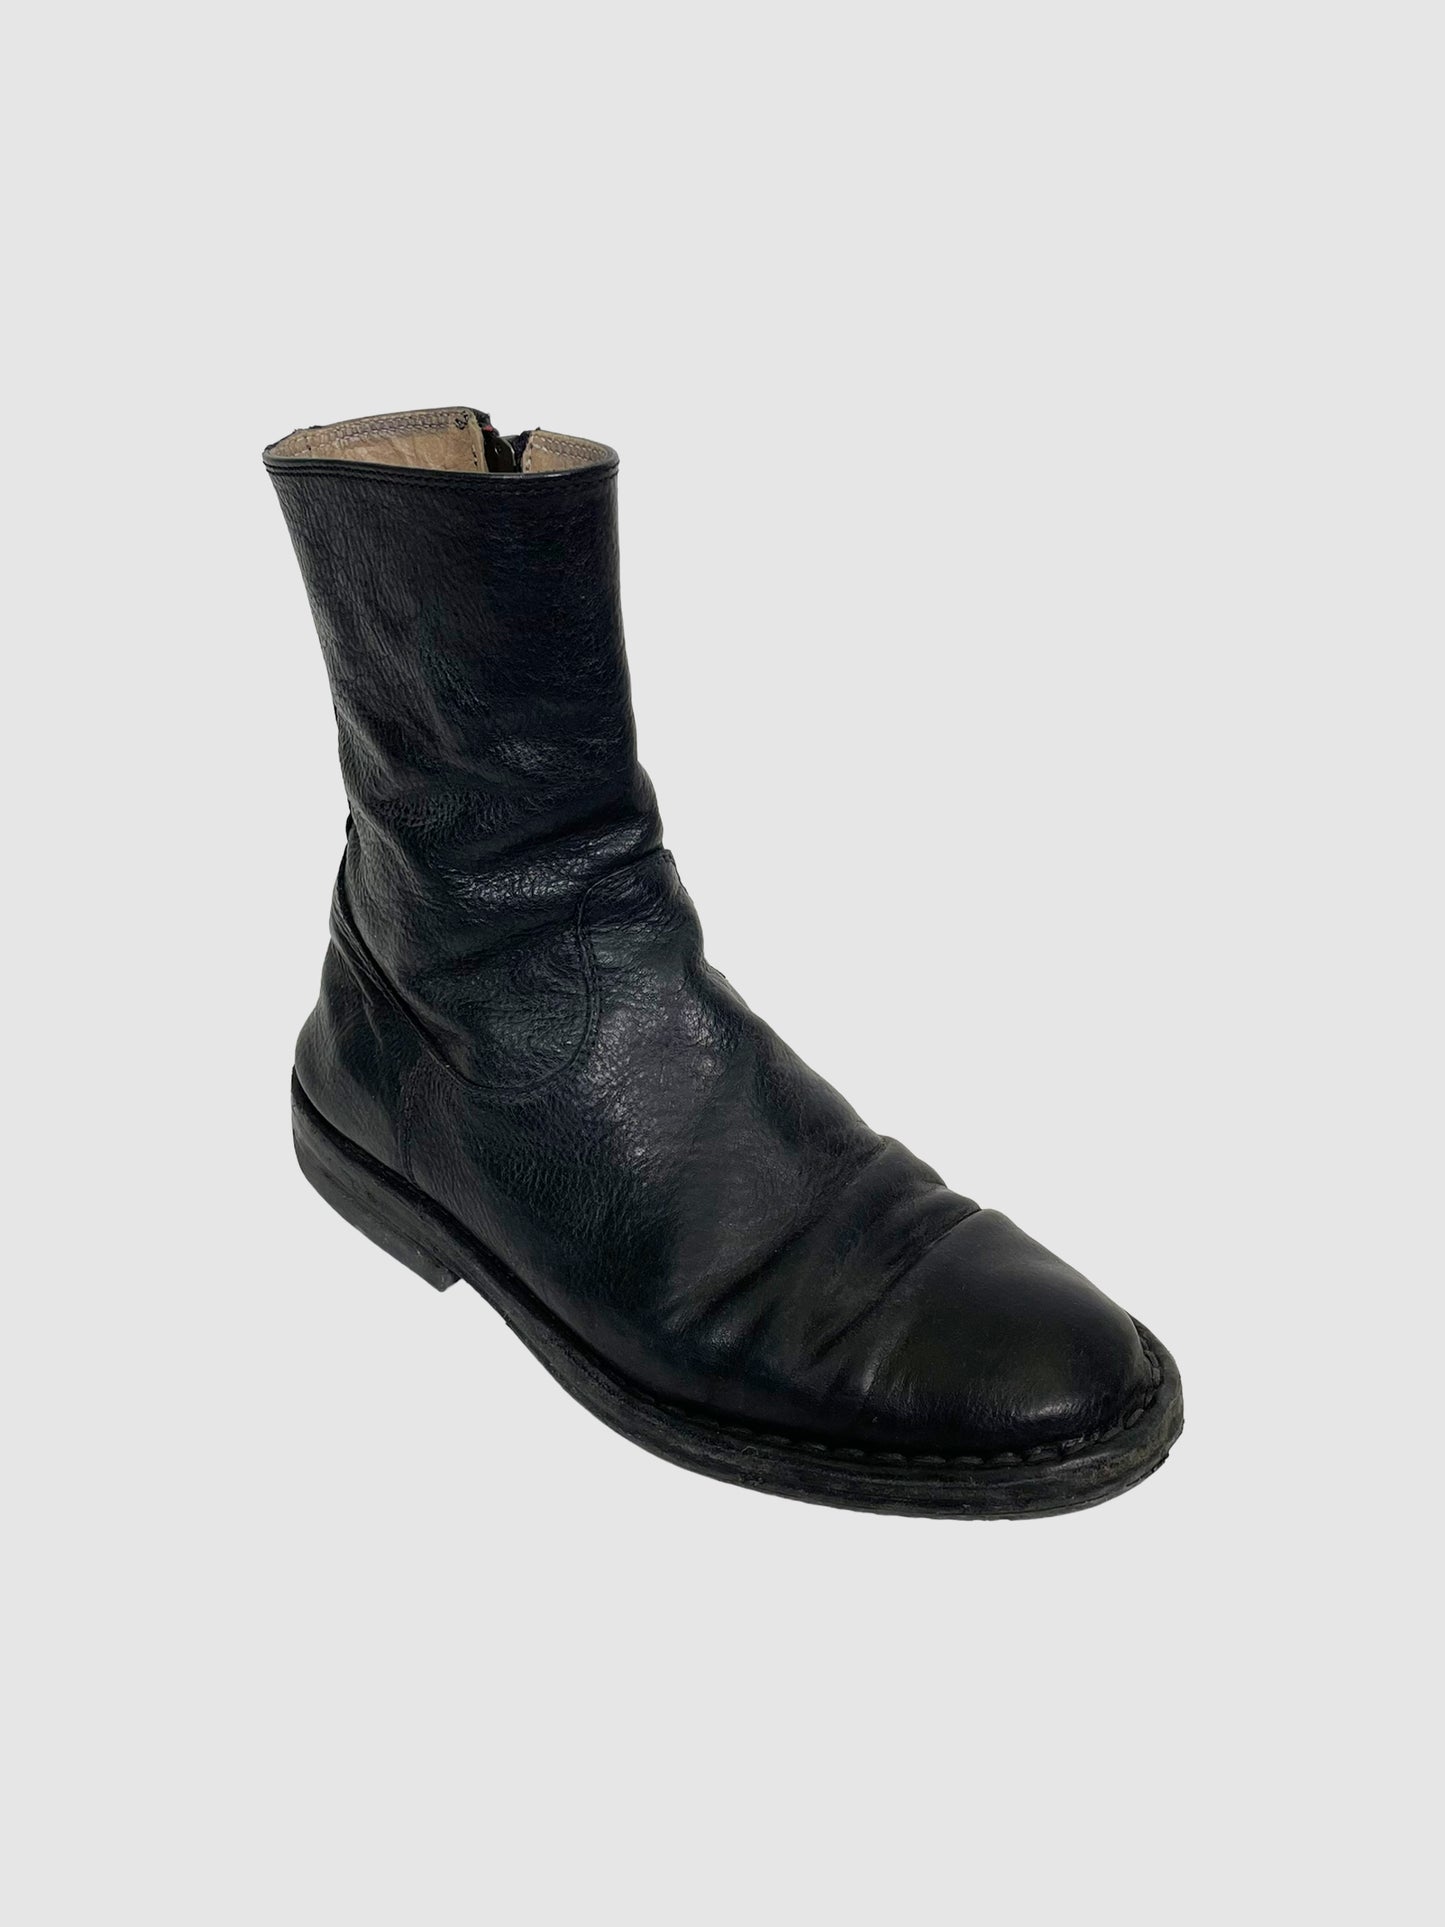 Leather Ankle Boots - Size 6/7